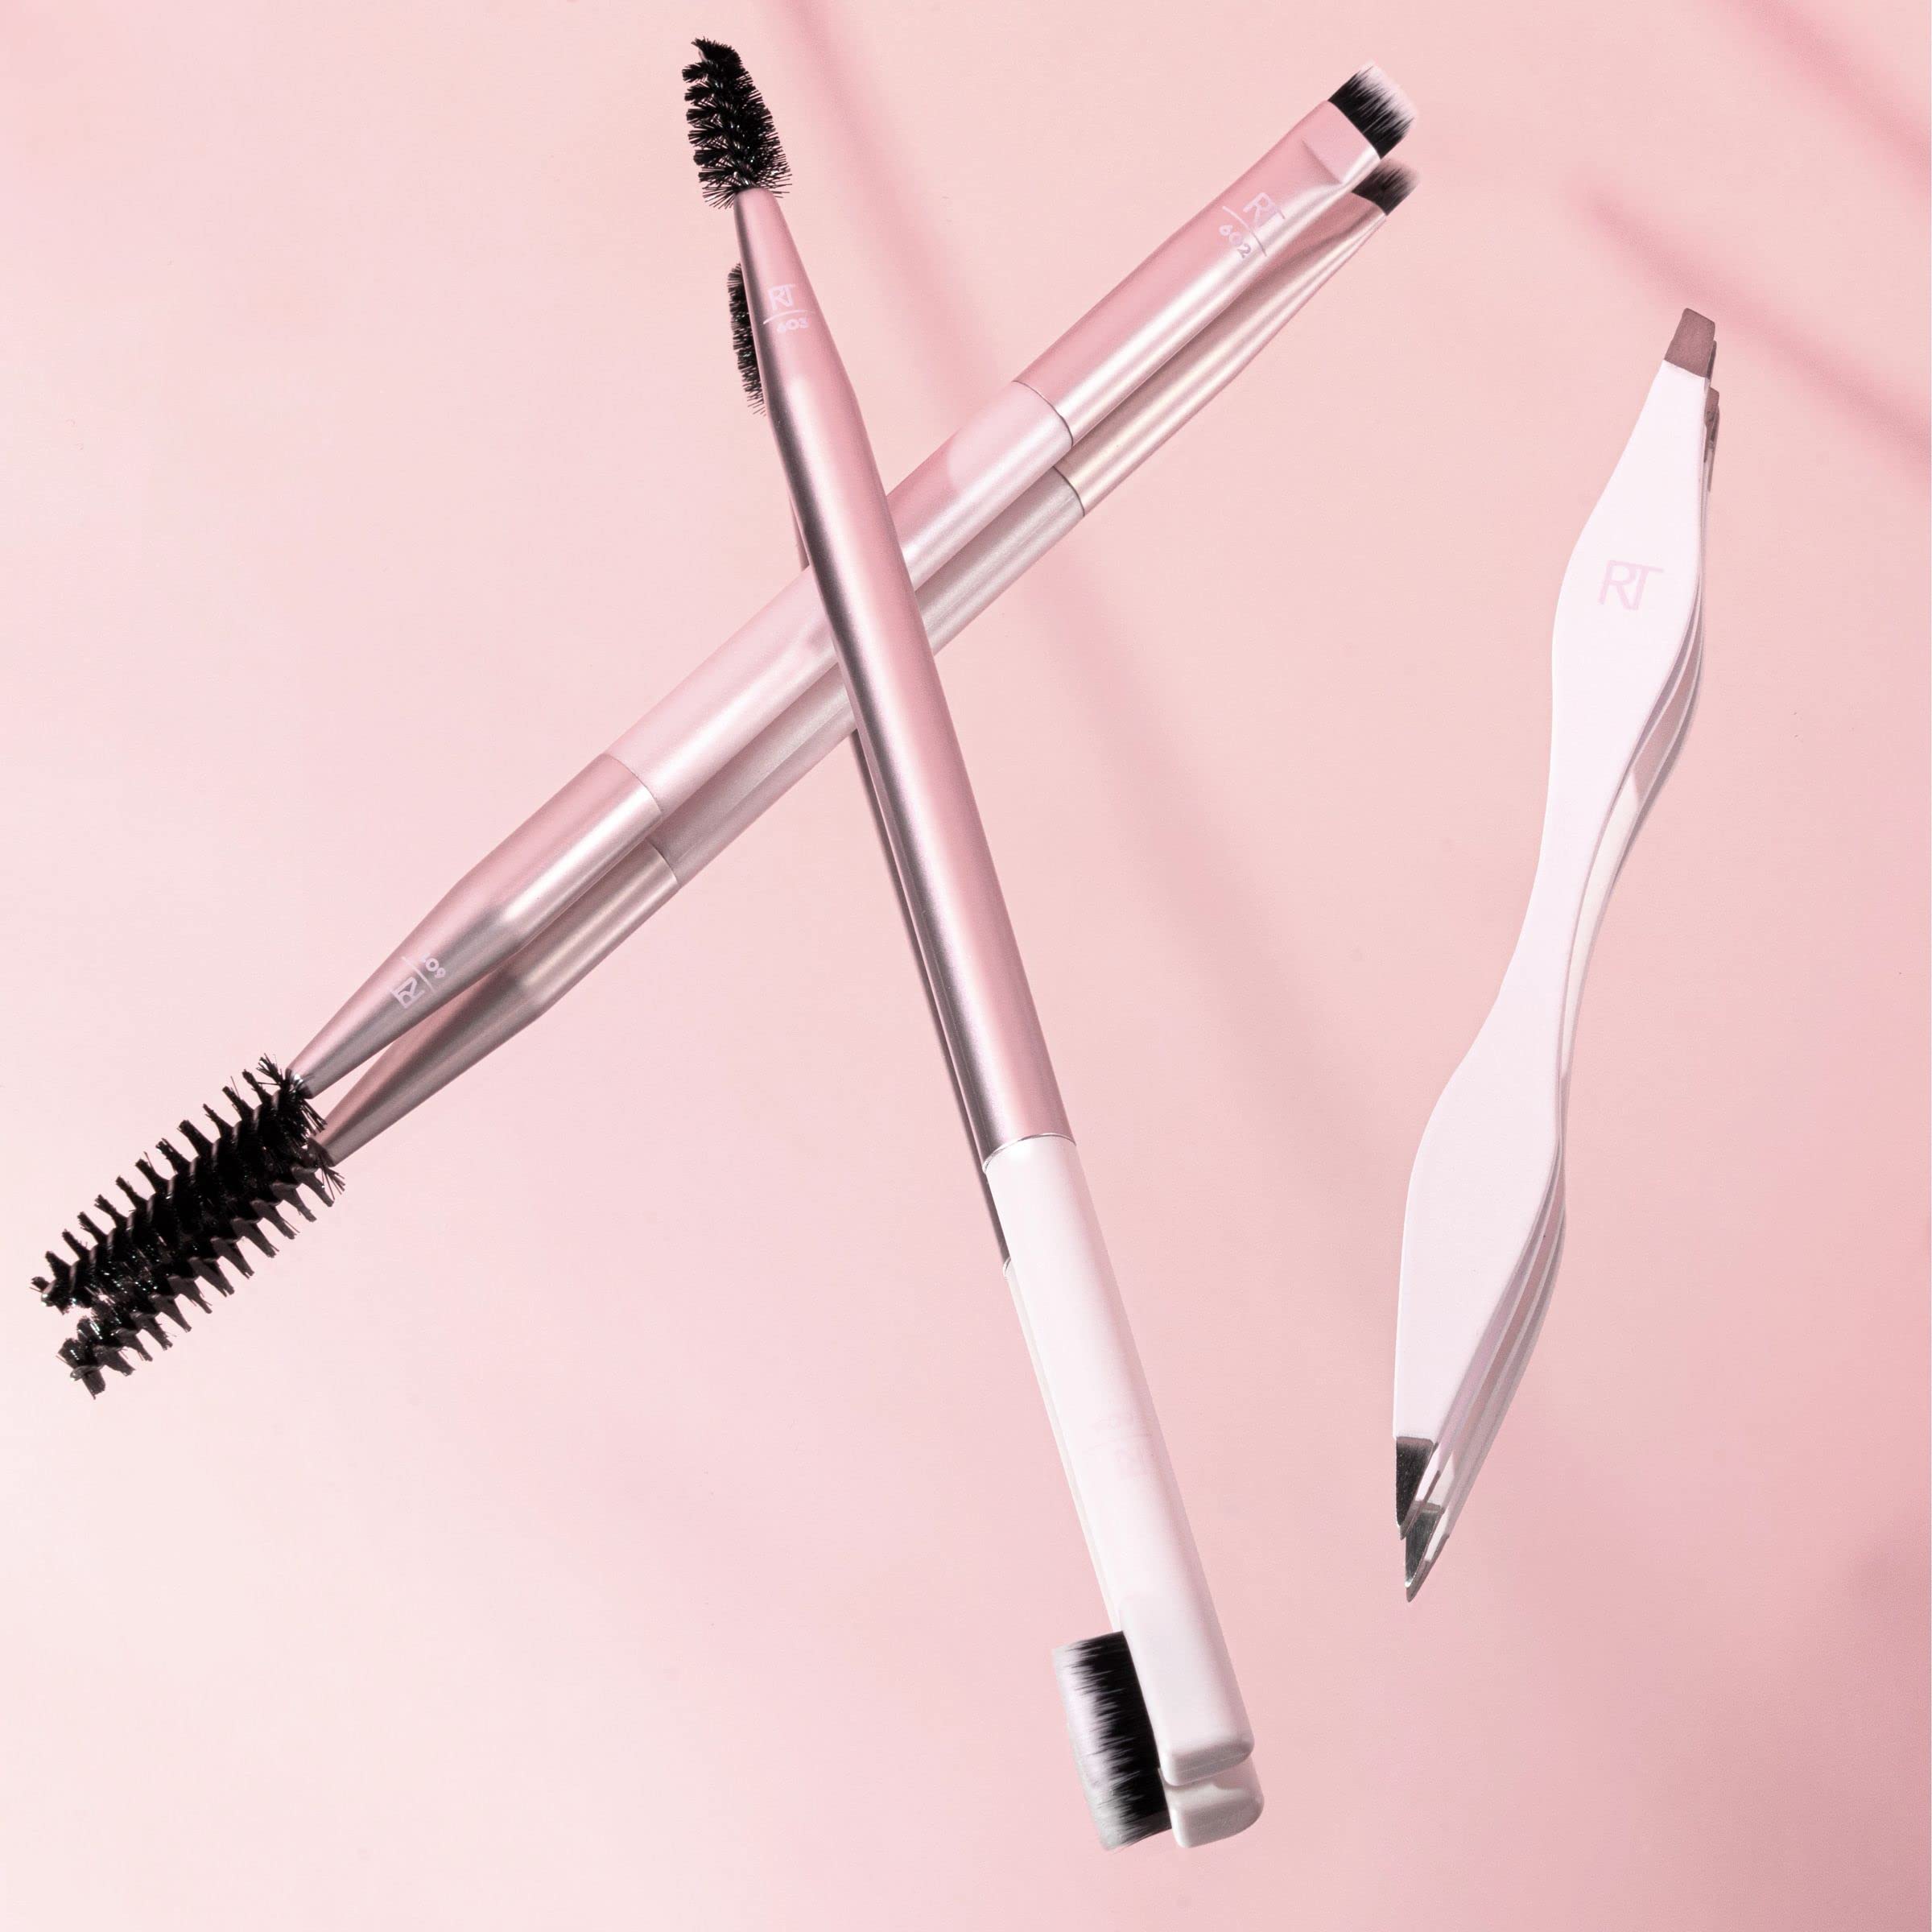 Real Techniques Brow Shaping Set, Spoolie, Tweezers & Brow Brushes, Dual-Ended Tools, For Styling, & Shaping Eyebrows, Get Full, Fluffy Brows, Multiuse Brushes, Cruelty-Free, 3 Piece Set